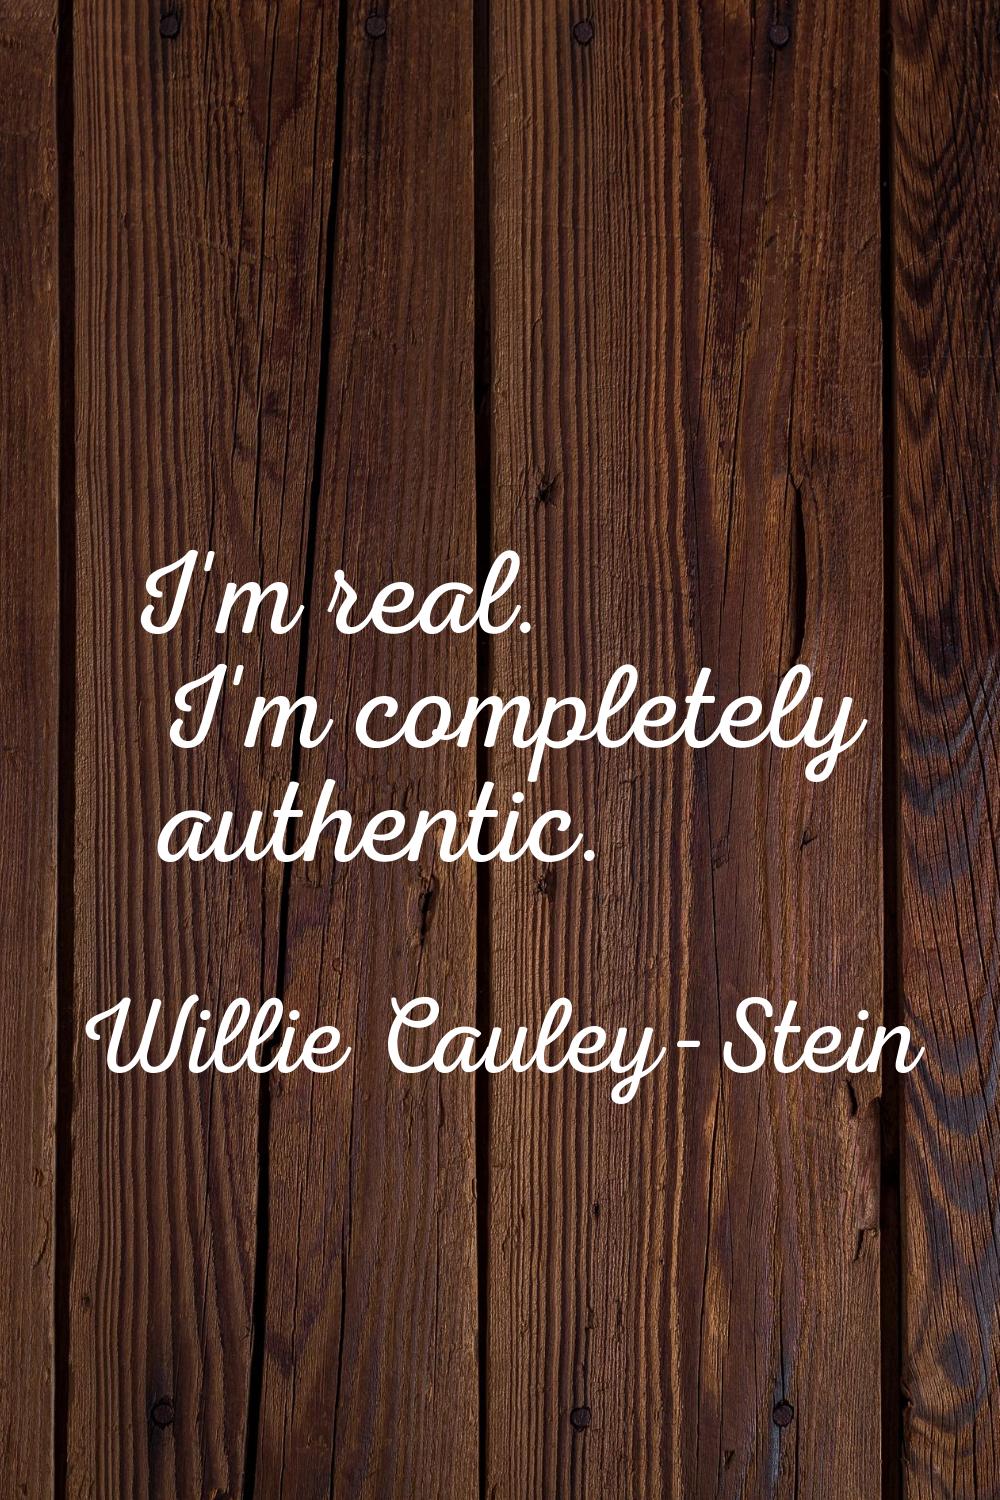 I'm real. I'm completely authentic.